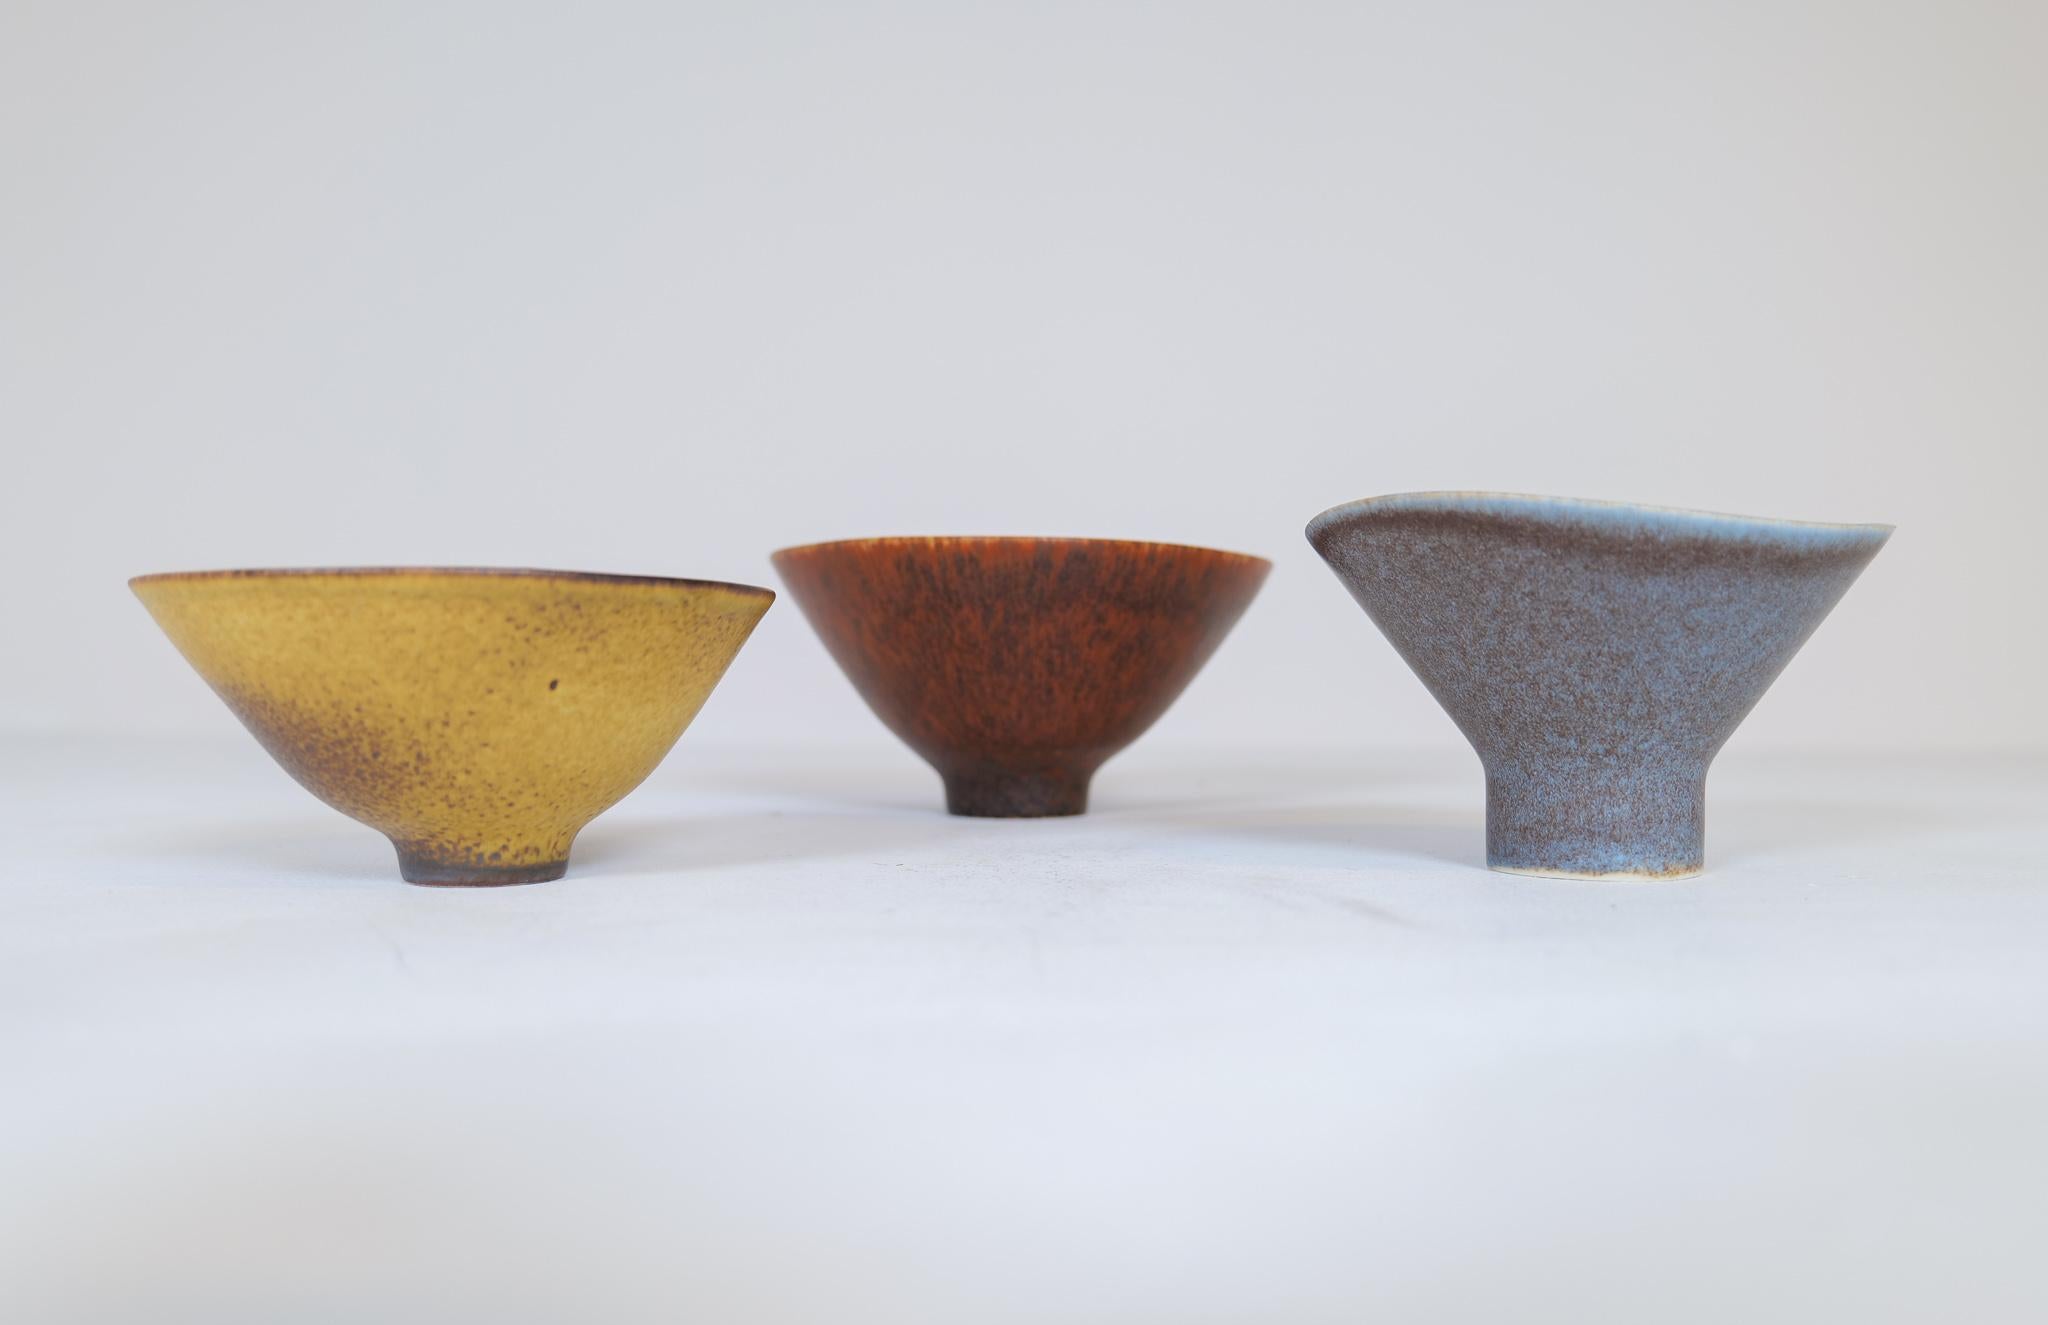 This set of 3 studio bowls was made at Rörstrand and maker / designer Carl Harry Stålhane. Made in Sweden in the mid-century. Beautiful, glazed bowls in good condition. The bowls are in three different sizes and shapes. The organic shape together